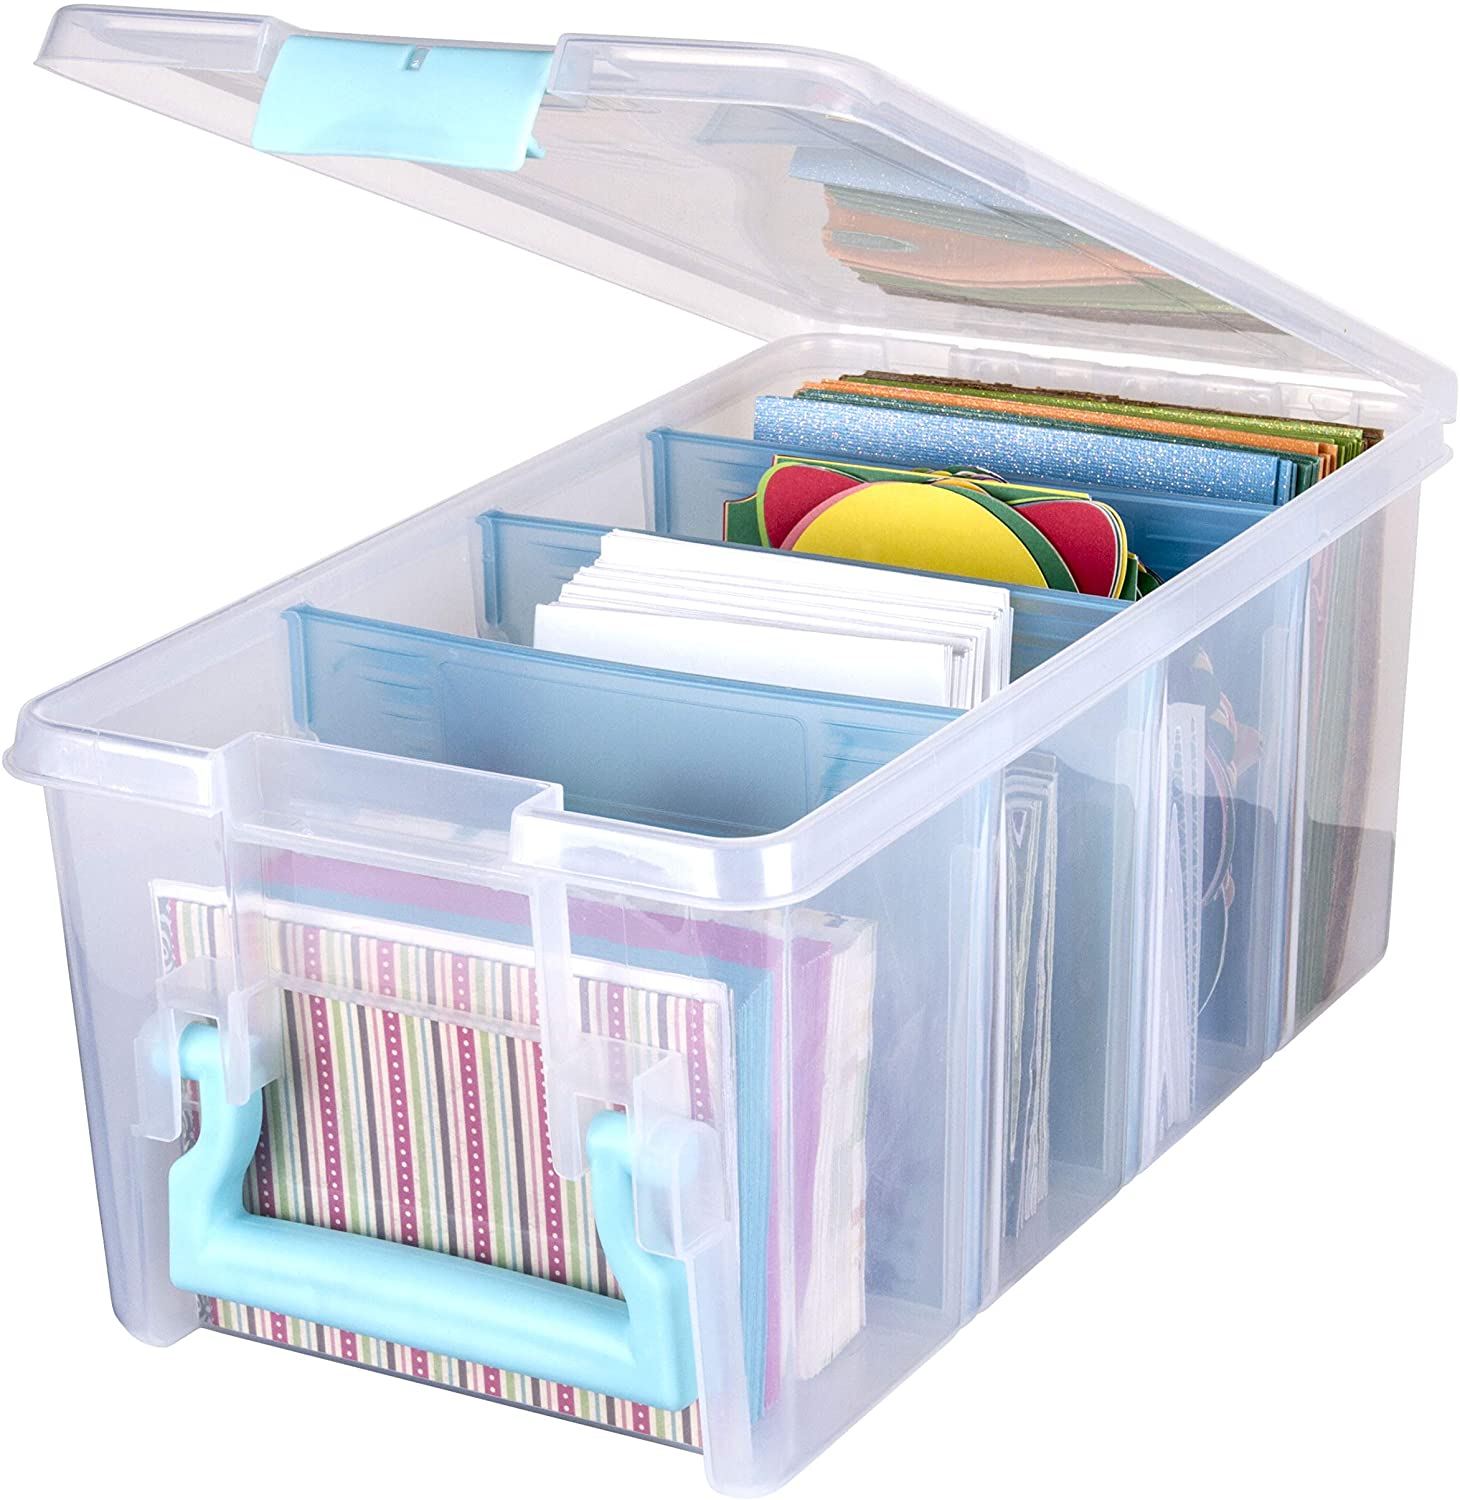 ArtBin Plastic Book Storage Boxes With Dividers & Handles, 1-Pack